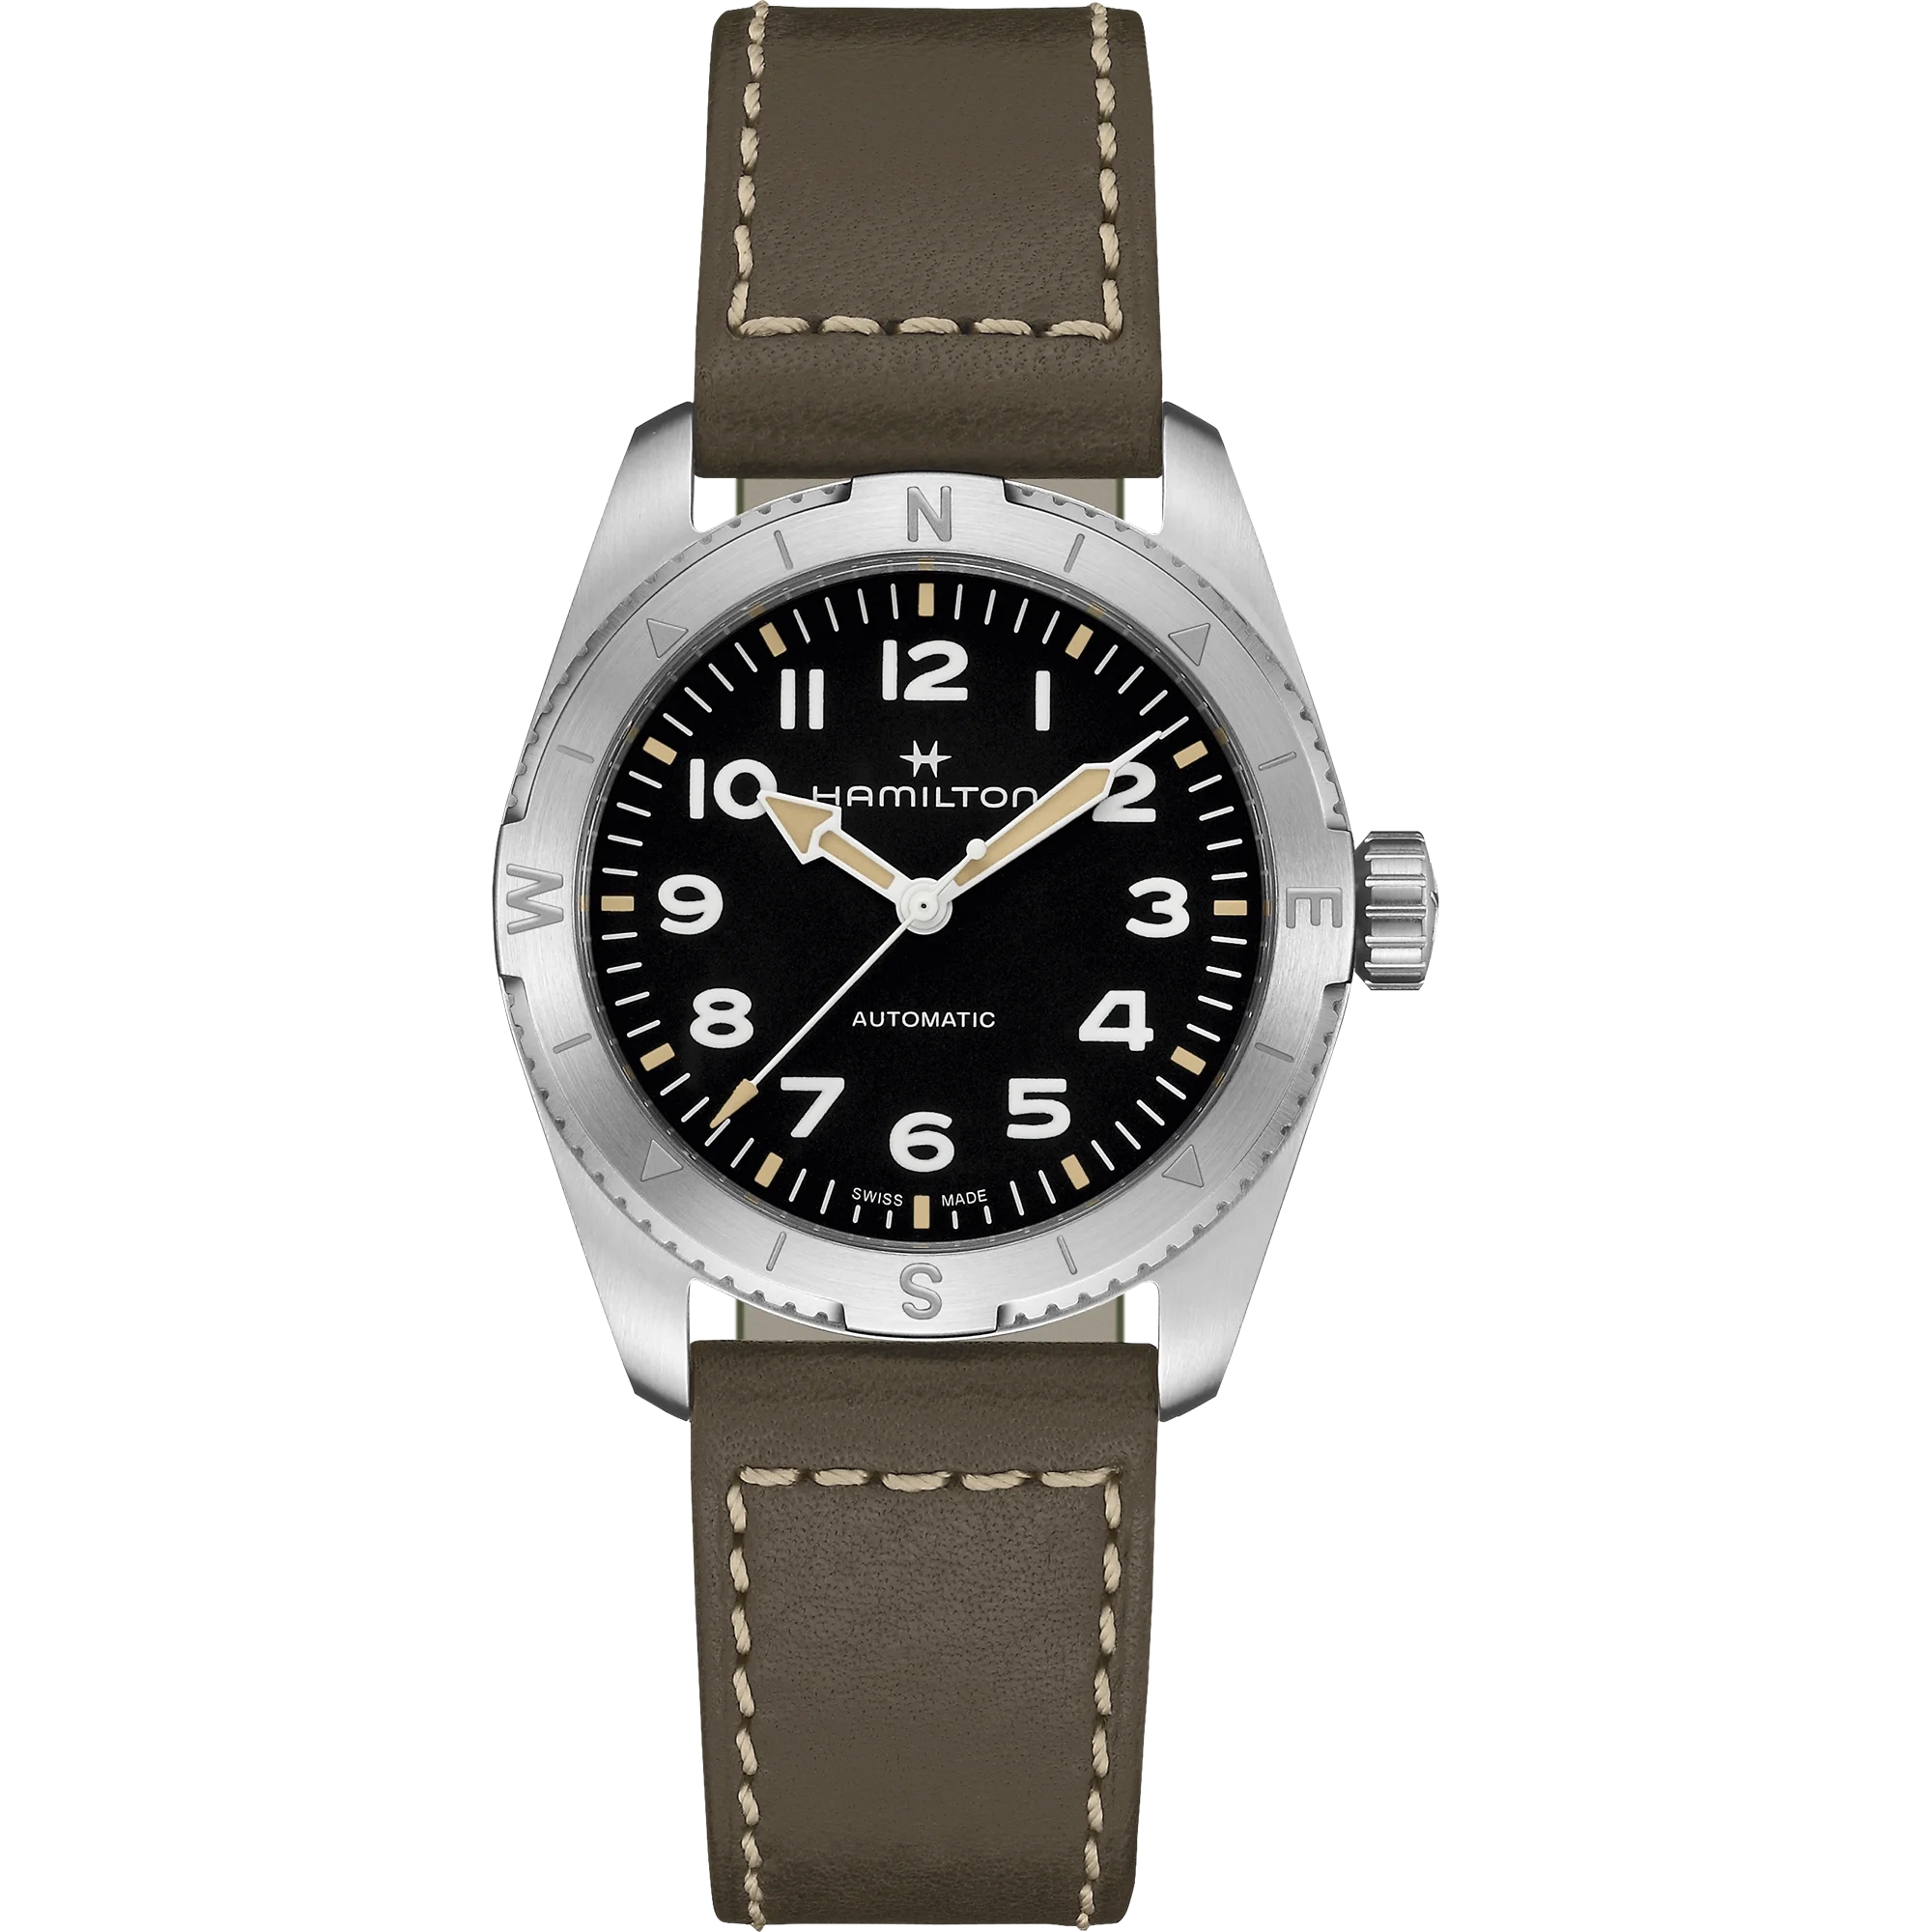 Khaki Field Expedition Auto - 37mm - H70225830